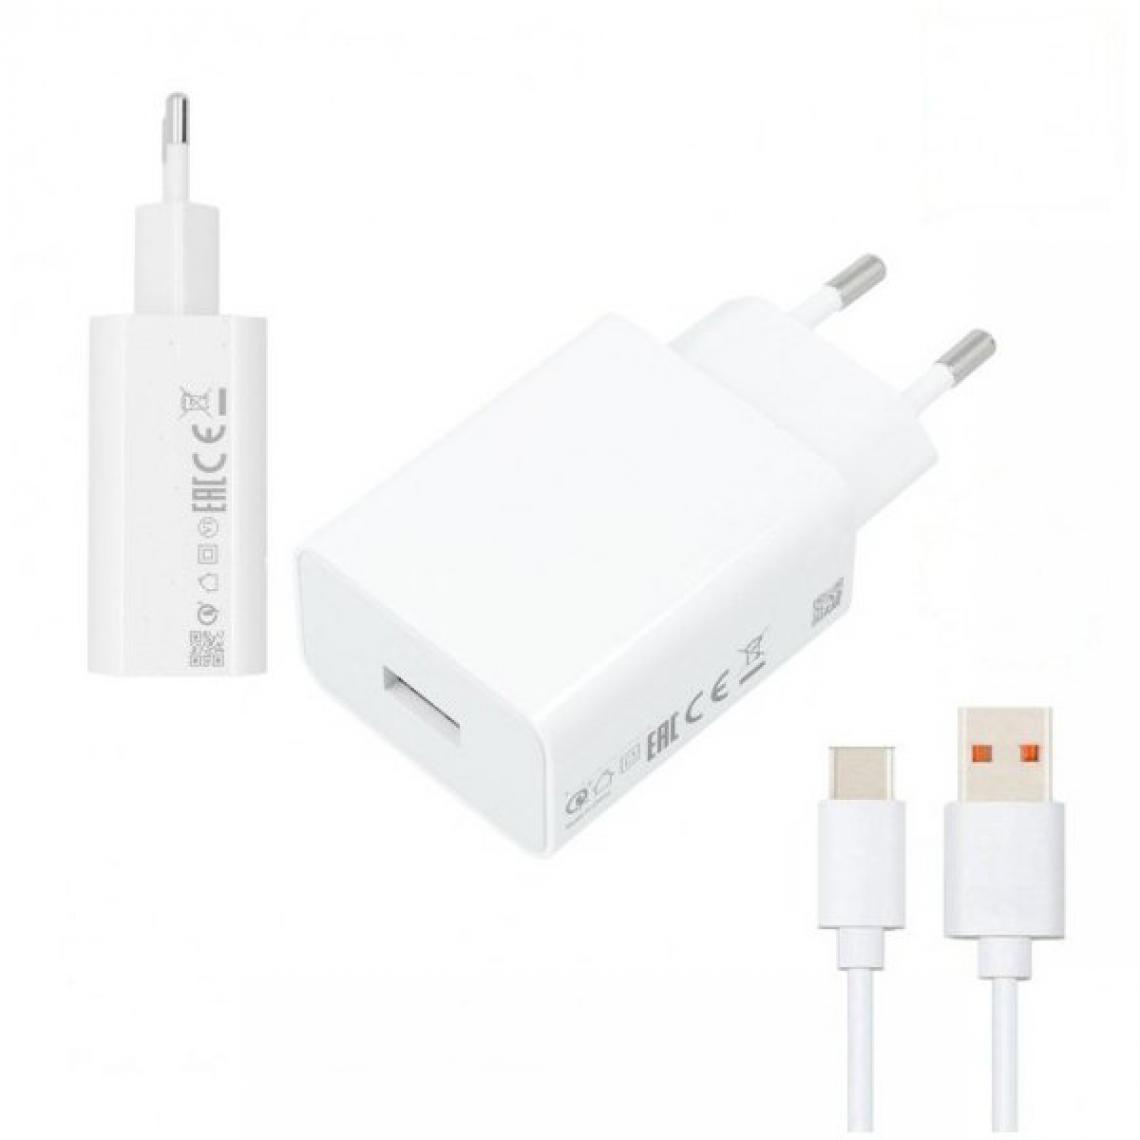 Phonecare - Kit Chargeur Turbo Fast Charge 33W 3A USB + Câble de Charge Turbo Fast Charge 5A Type-C 1M - Xiaomi Mi 11 - Autres accessoires smartphone